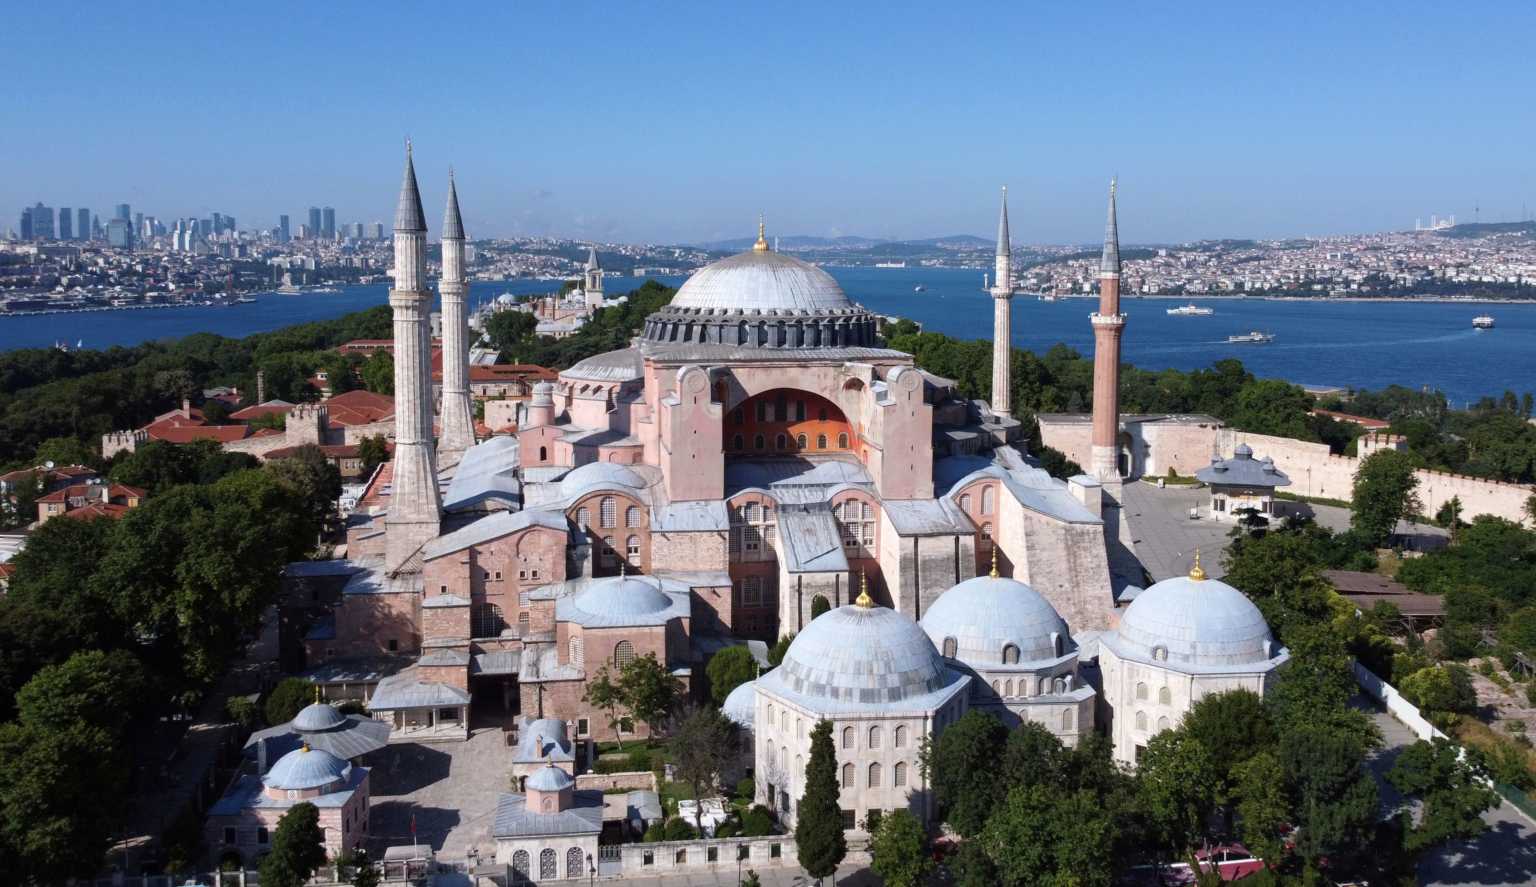 Hagia Sophia or Ayasofya, a UNESCO World Heritage Site, that was a Byzantine cathedral before being converted into a mosque which is currently a museum, is seen in Istanbul, Turkey, June 28, 2020. Picture taken June 28, 2020. Picture taken with a drone. Picture taken June 28, 2020. REUTERS/Murad Sezer